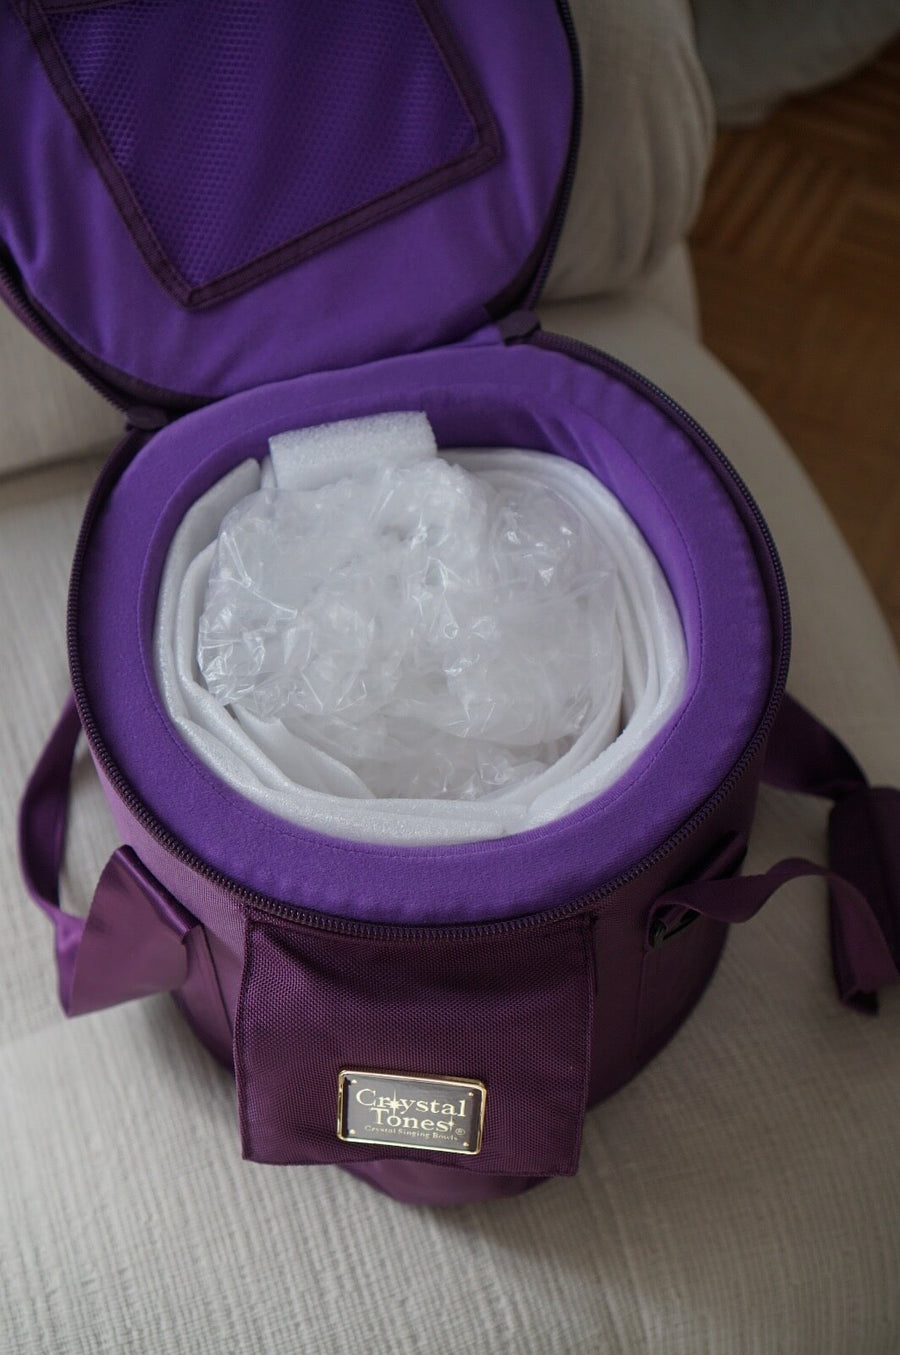 View inside the purple case from Crystal Tones